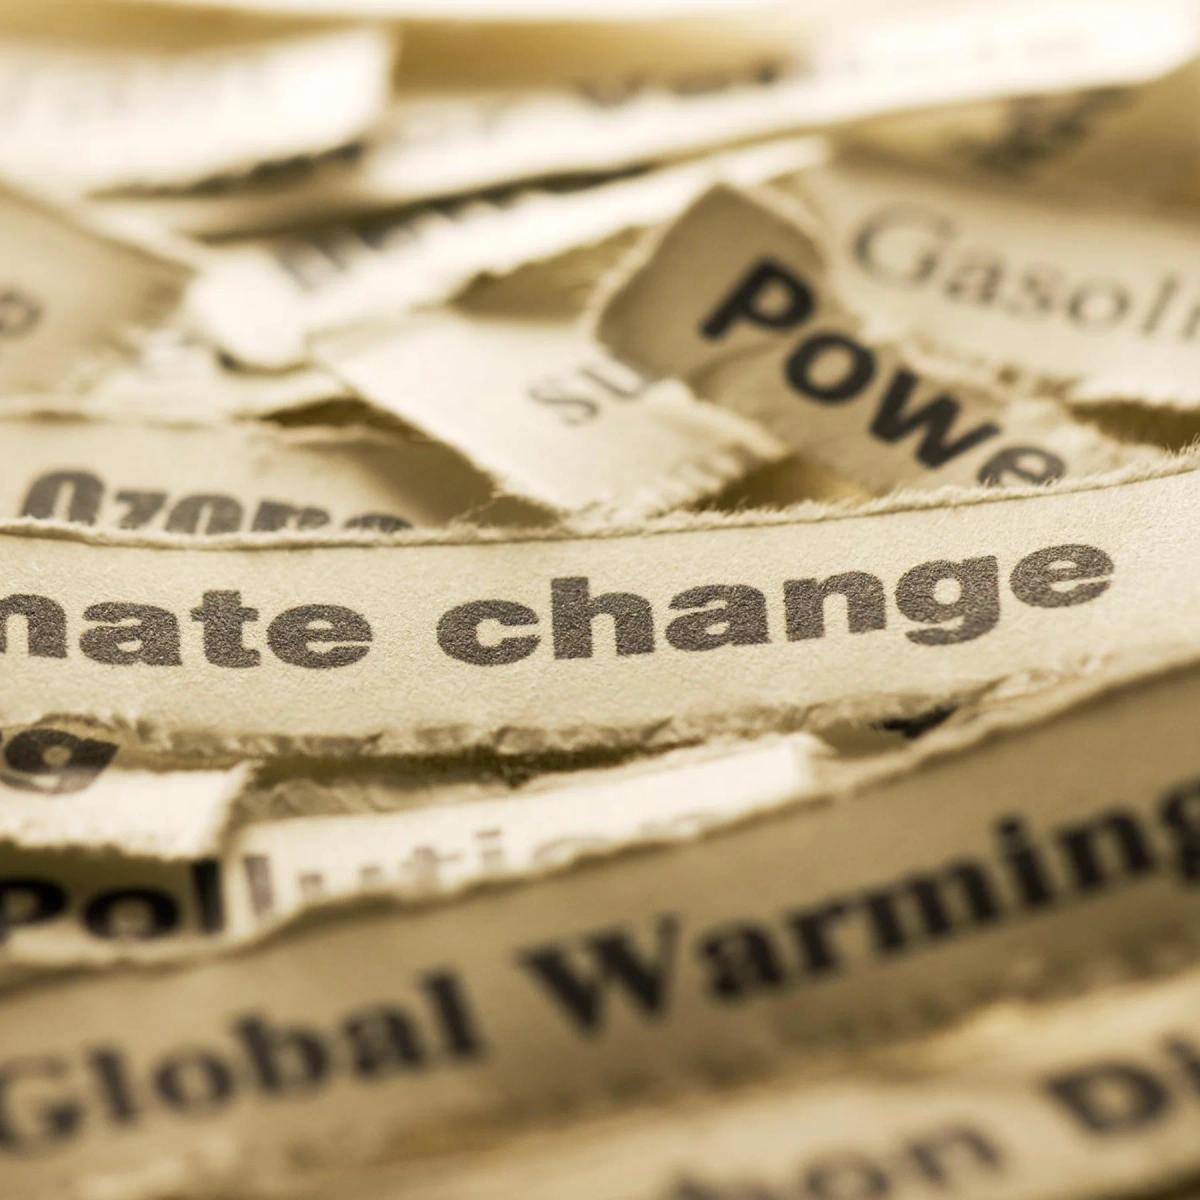 Media coverage of climate change research does not inspire action 